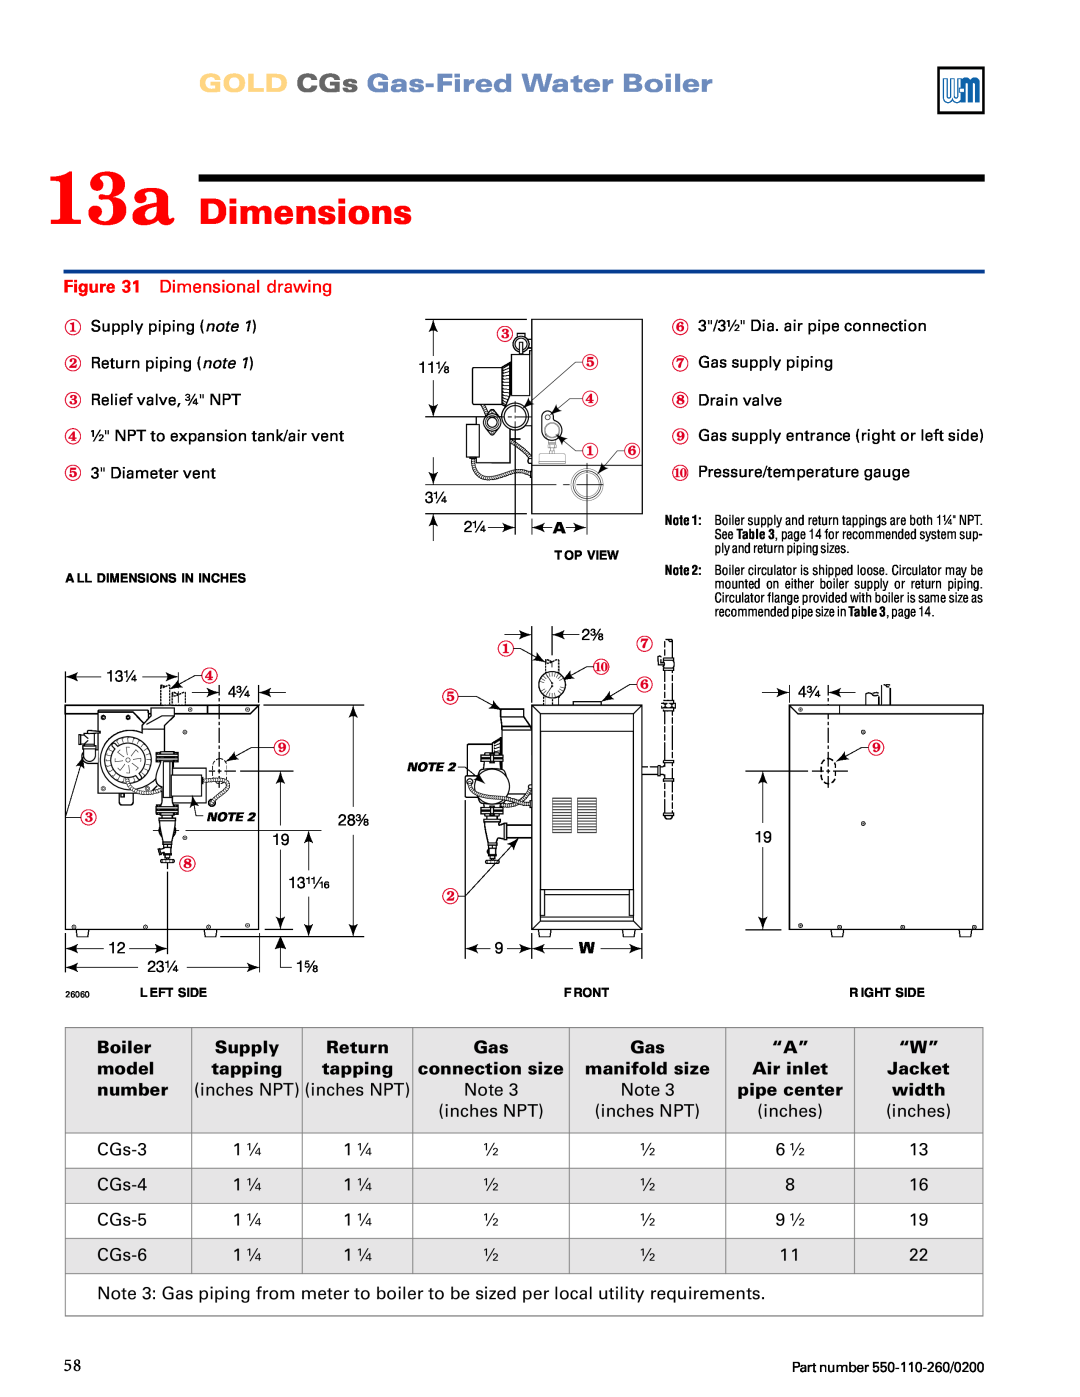 Weil-McLain 550-110-260/02002 manual 13a Dimensions, GOLD CGs Gas-FiredWater Boiler, Dimensional drawing 